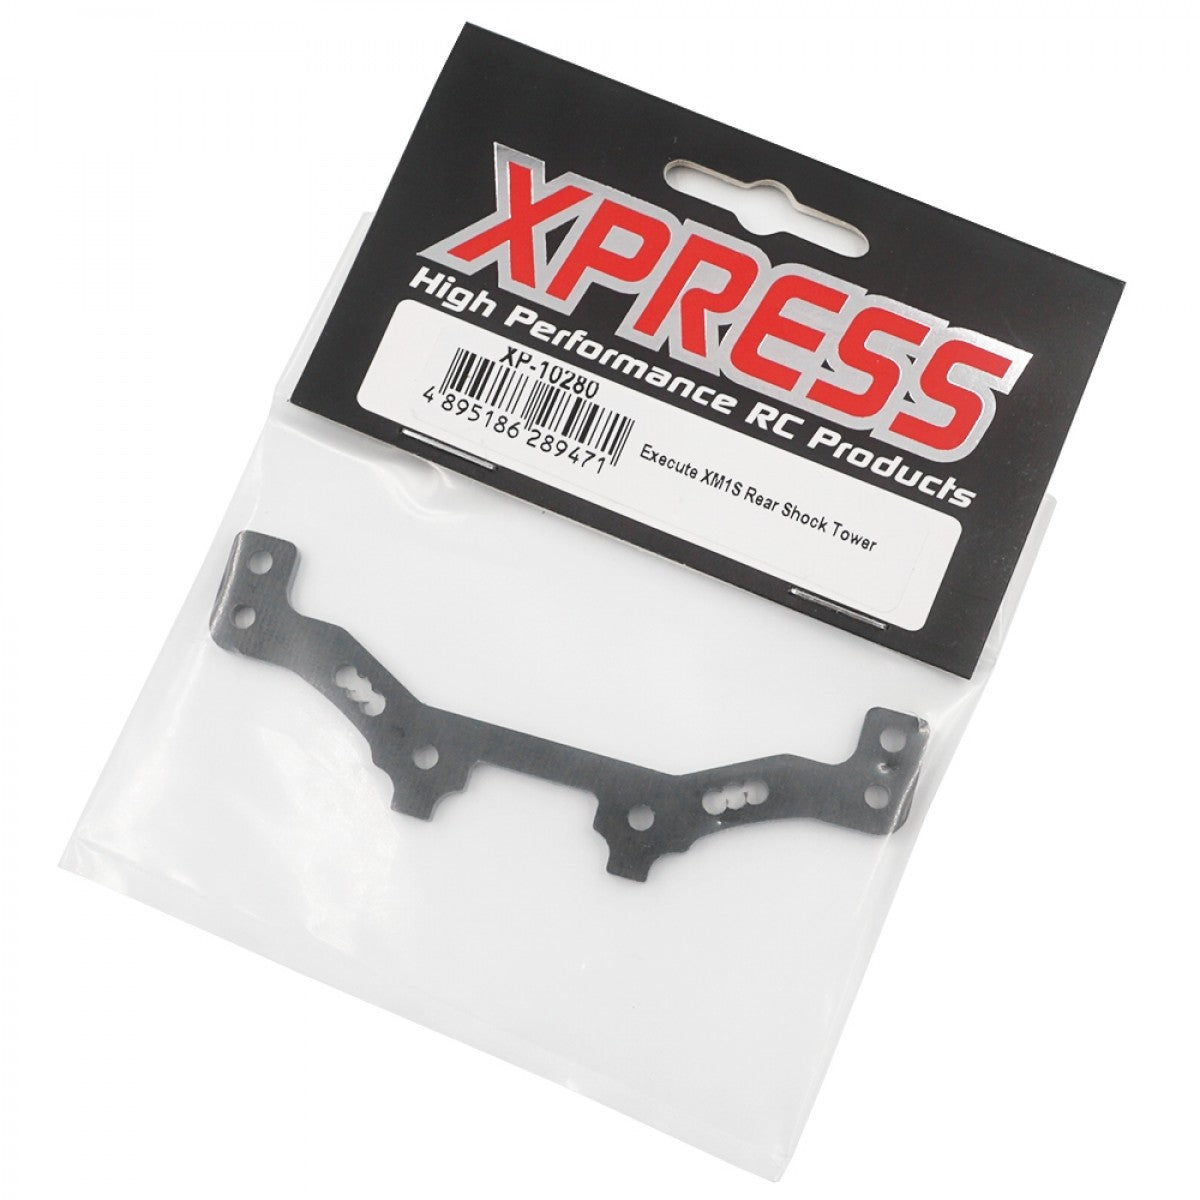 Xpress XP-10280 Rear Shock Tower for XM1S FM1S